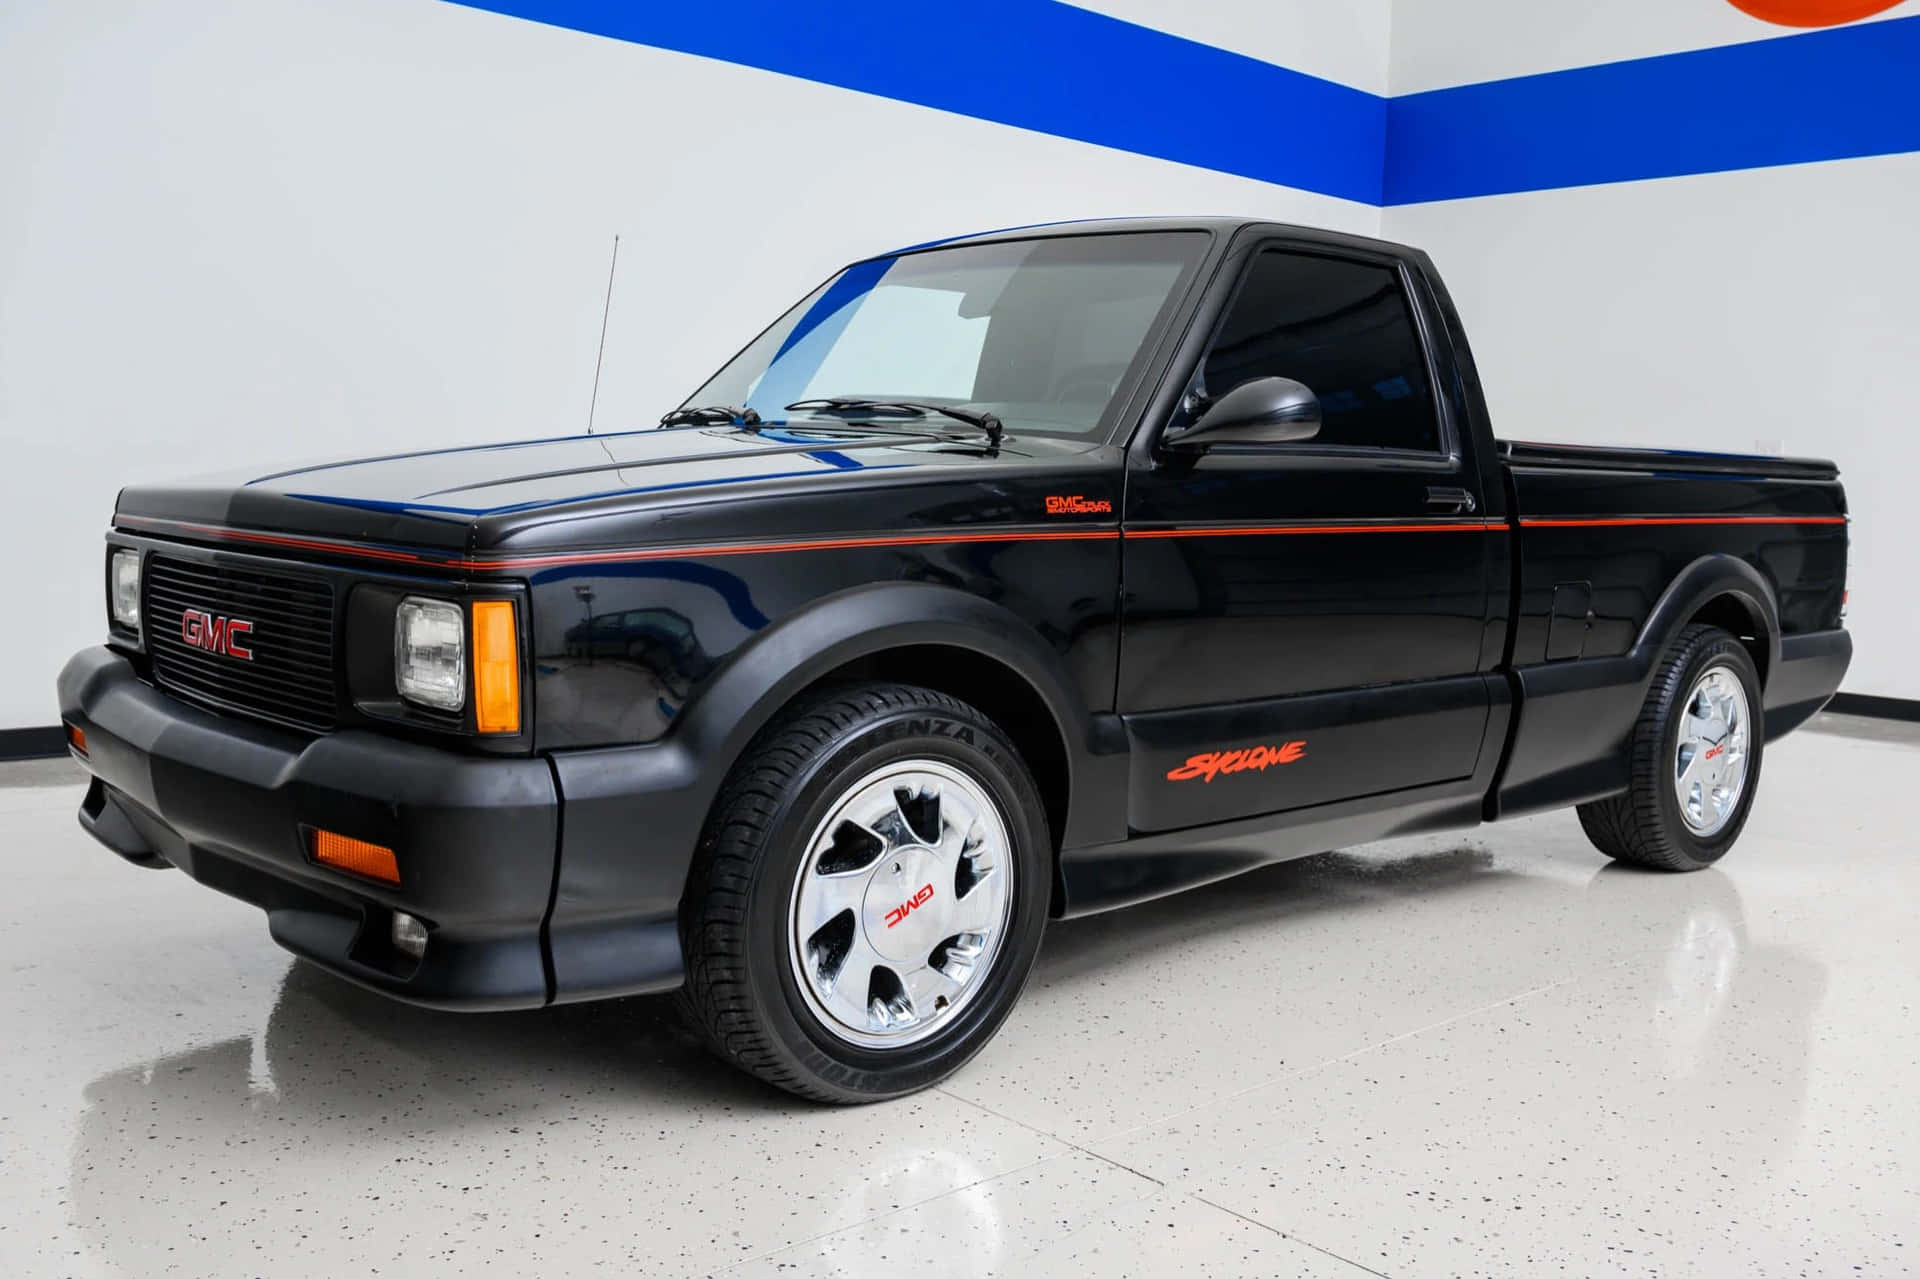 High-quality image of GMC Syclone Wallpaper